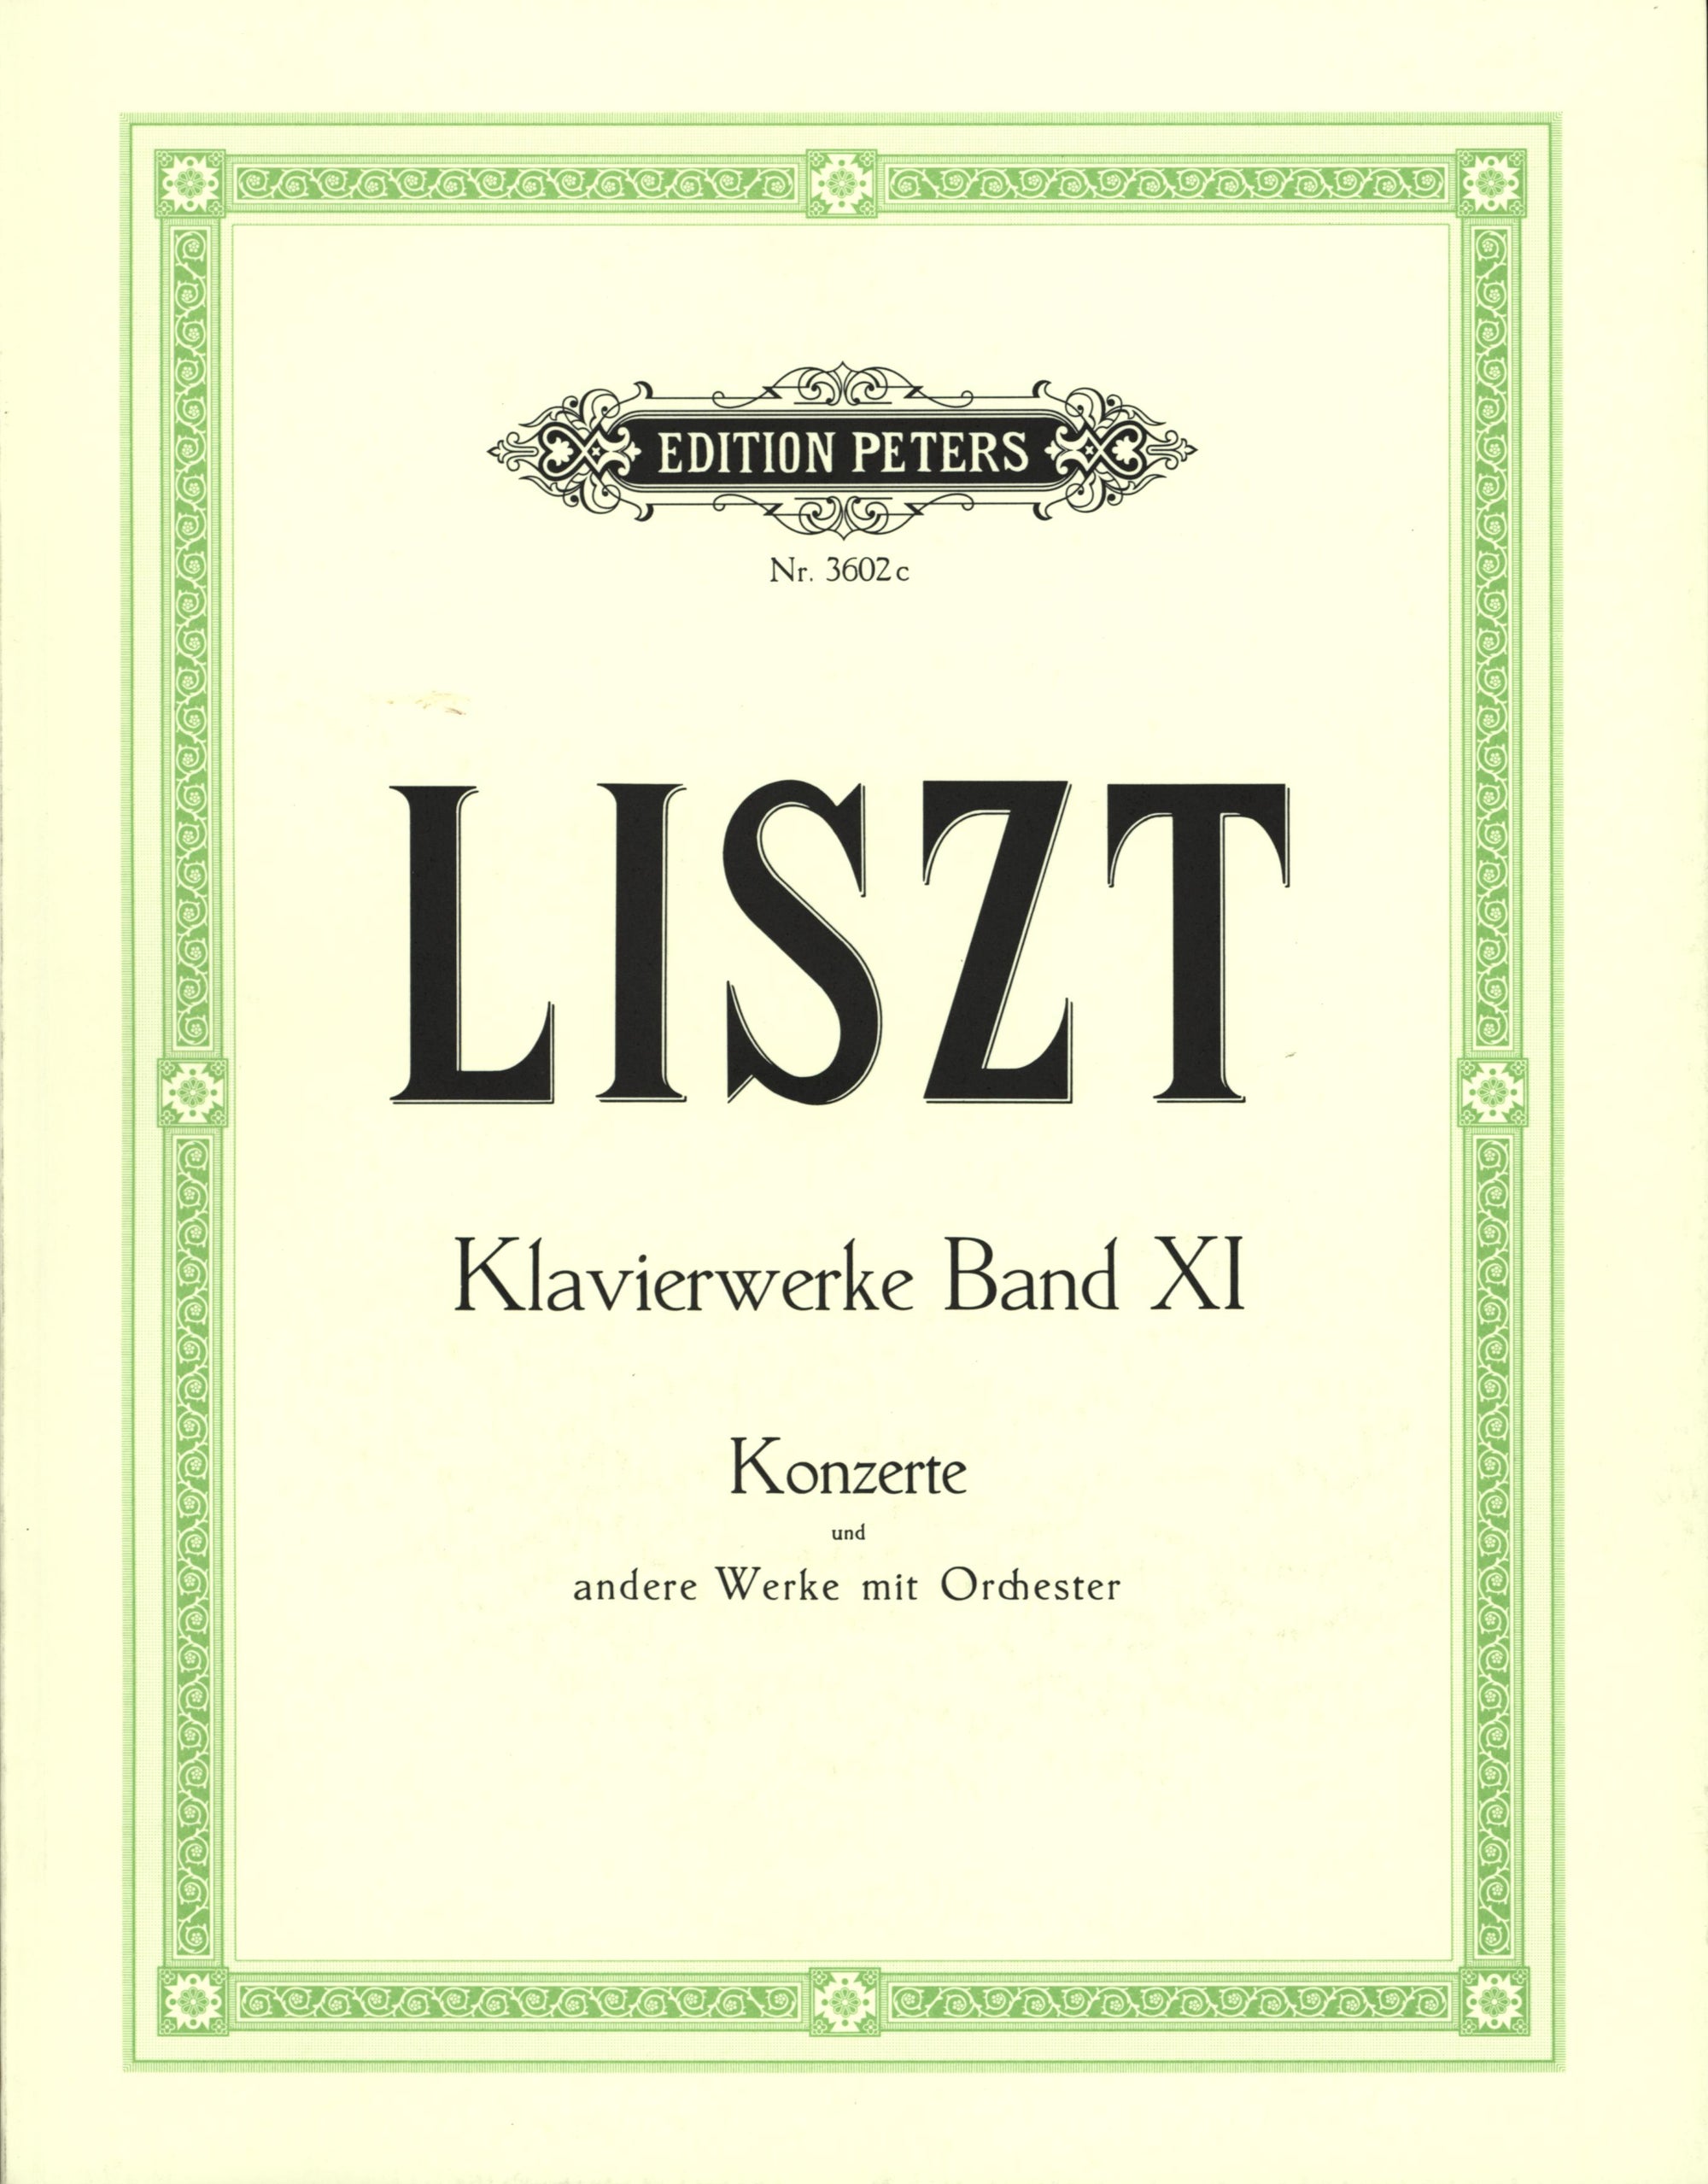 Liszt: Piano Works - Volume 11 (Concertos & Works with Orchestra)